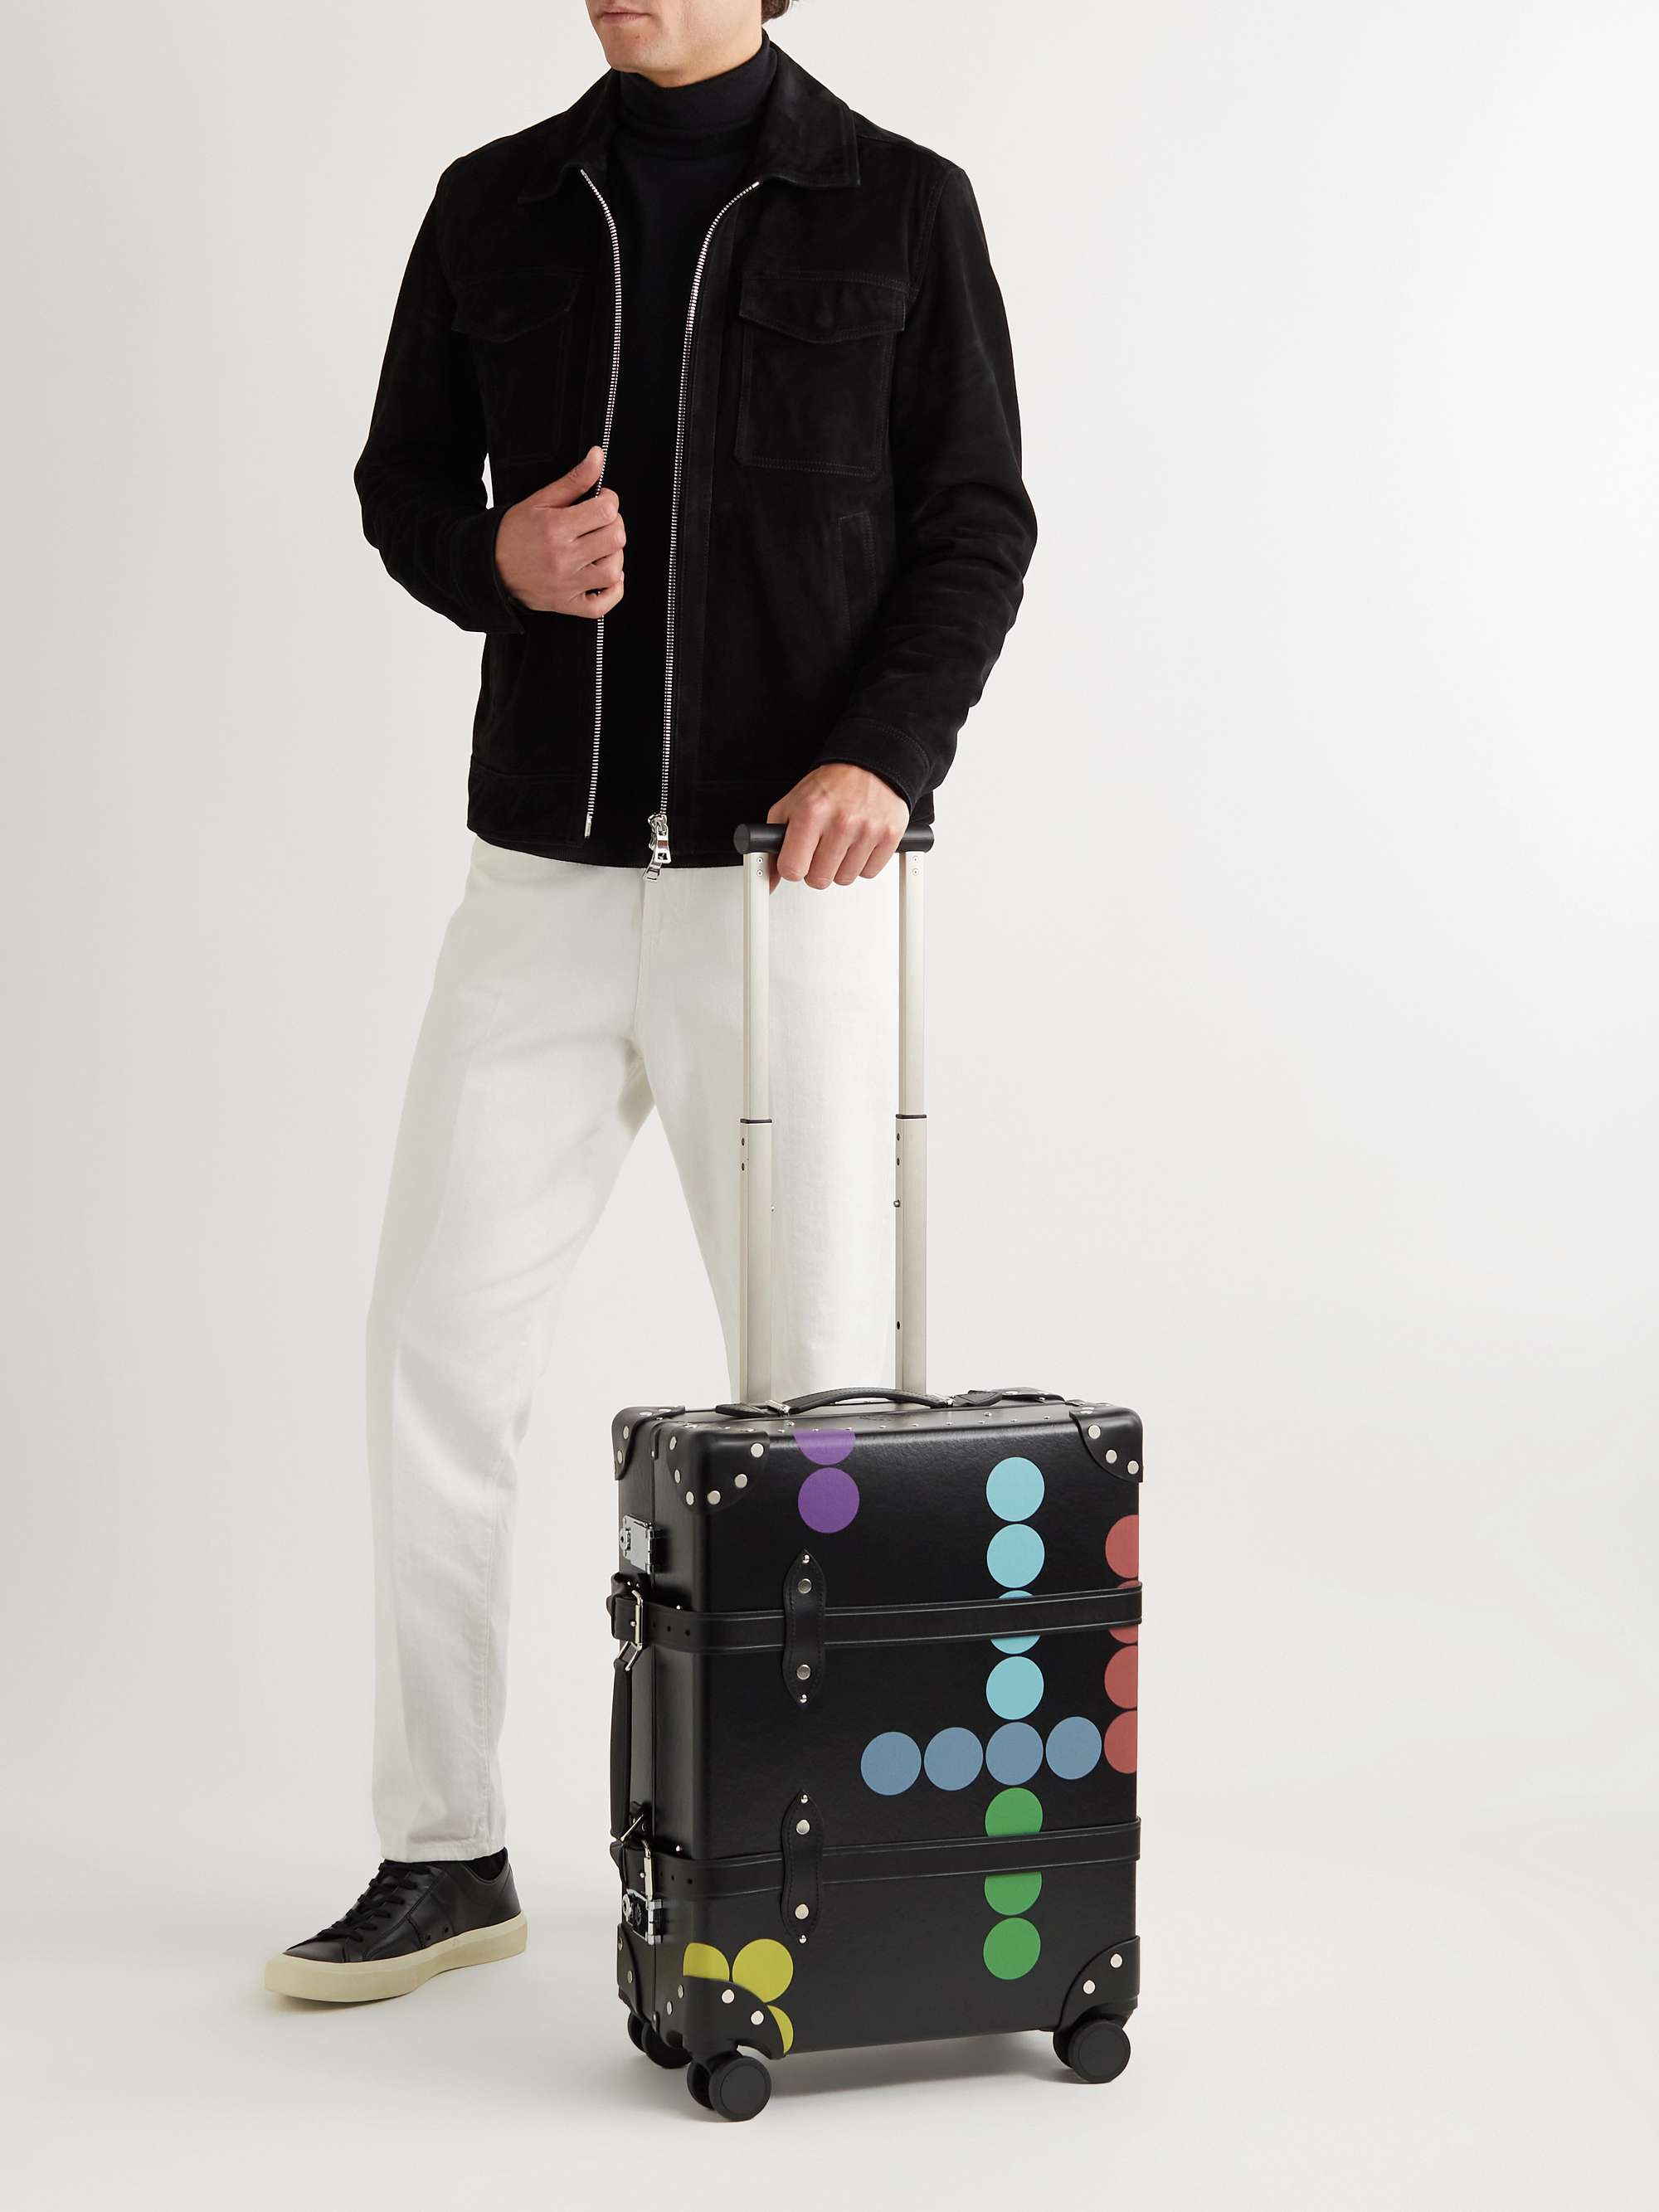 GLOBE-TROTTER + Dr. No Printed Carry-On Leather-Trimmed Trolley Suitcase